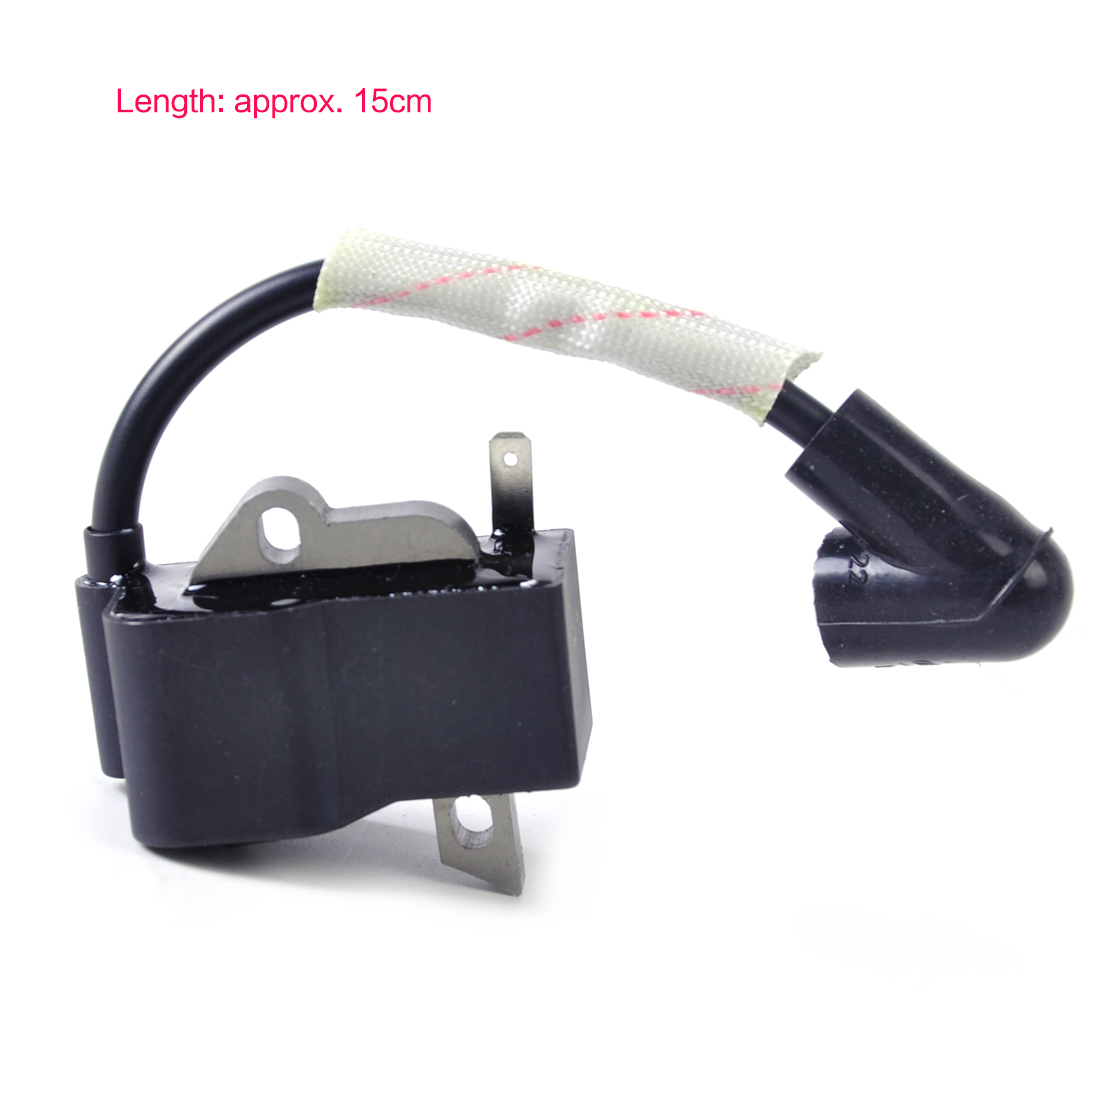 LETAOSK New Ignition Module Coil For Husqvarna 125B 125BVX Handheld Blower 545108101Accessories